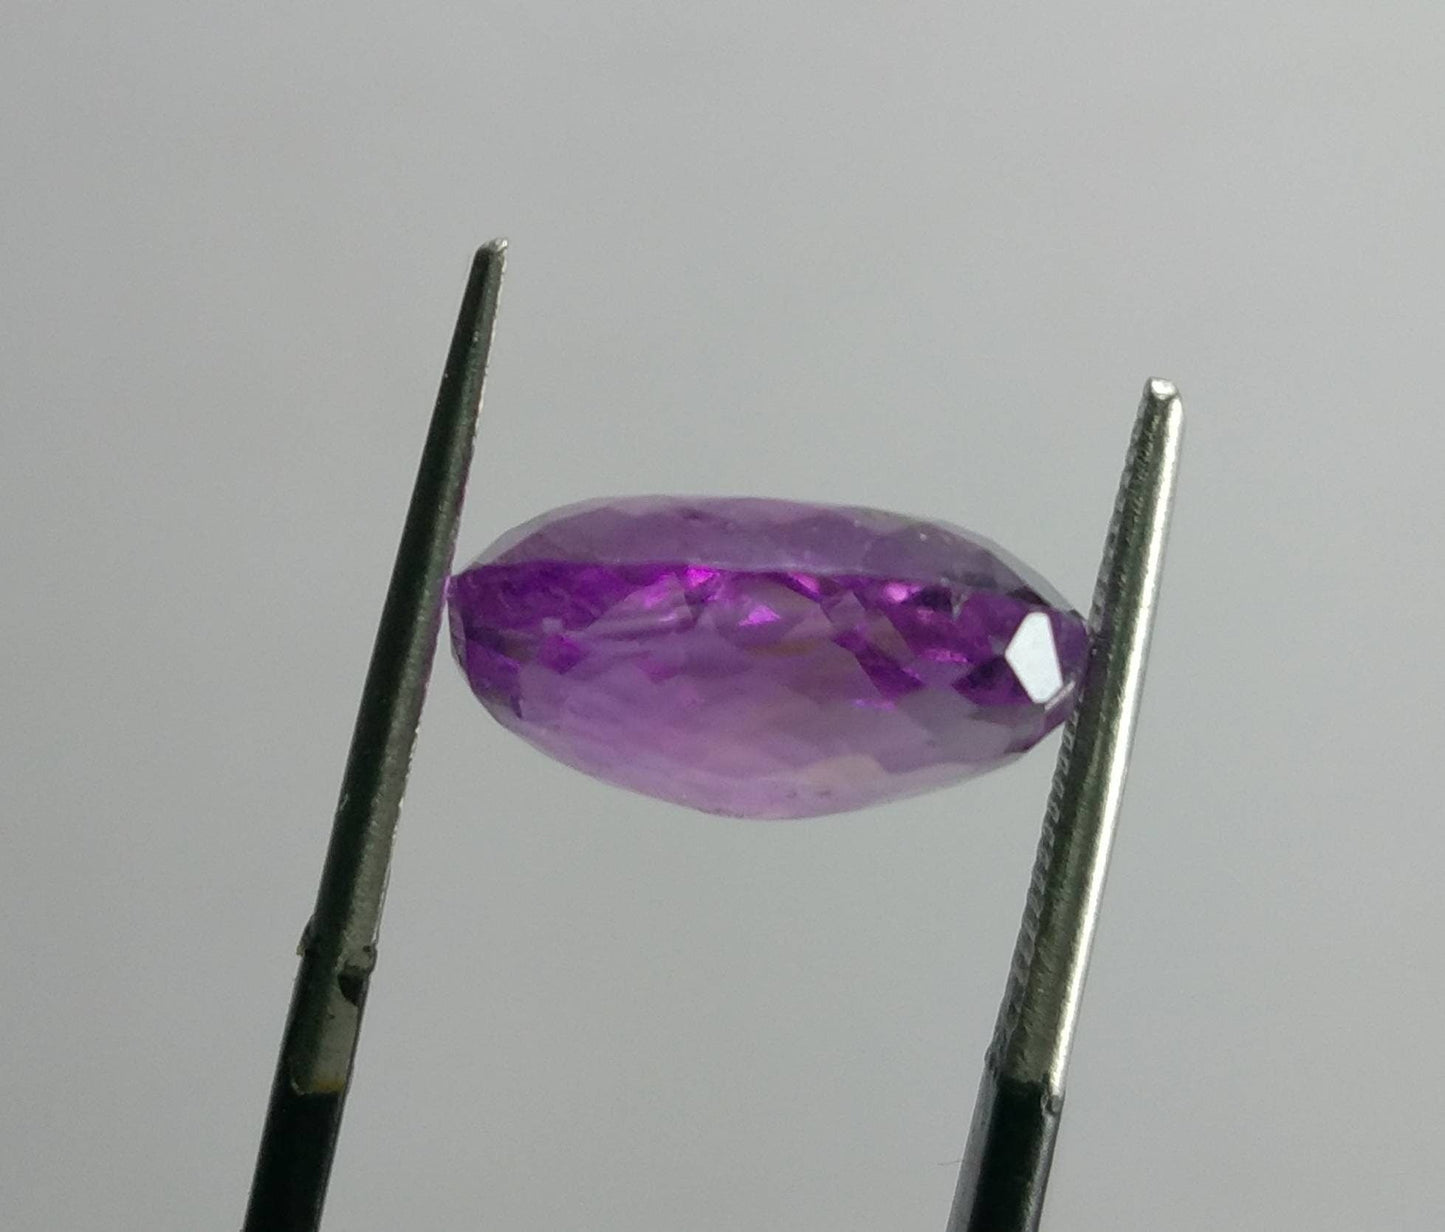 ARSAA GEMS AND MINERALSNatural top quality beautiful 7 carats oval shape deep purple VV clarity faceted amethyst gem - Premium  from ARSAA GEMS AND MINERALS - Just $21.00! Shop now at ARSAA GEMS AND MINERALS